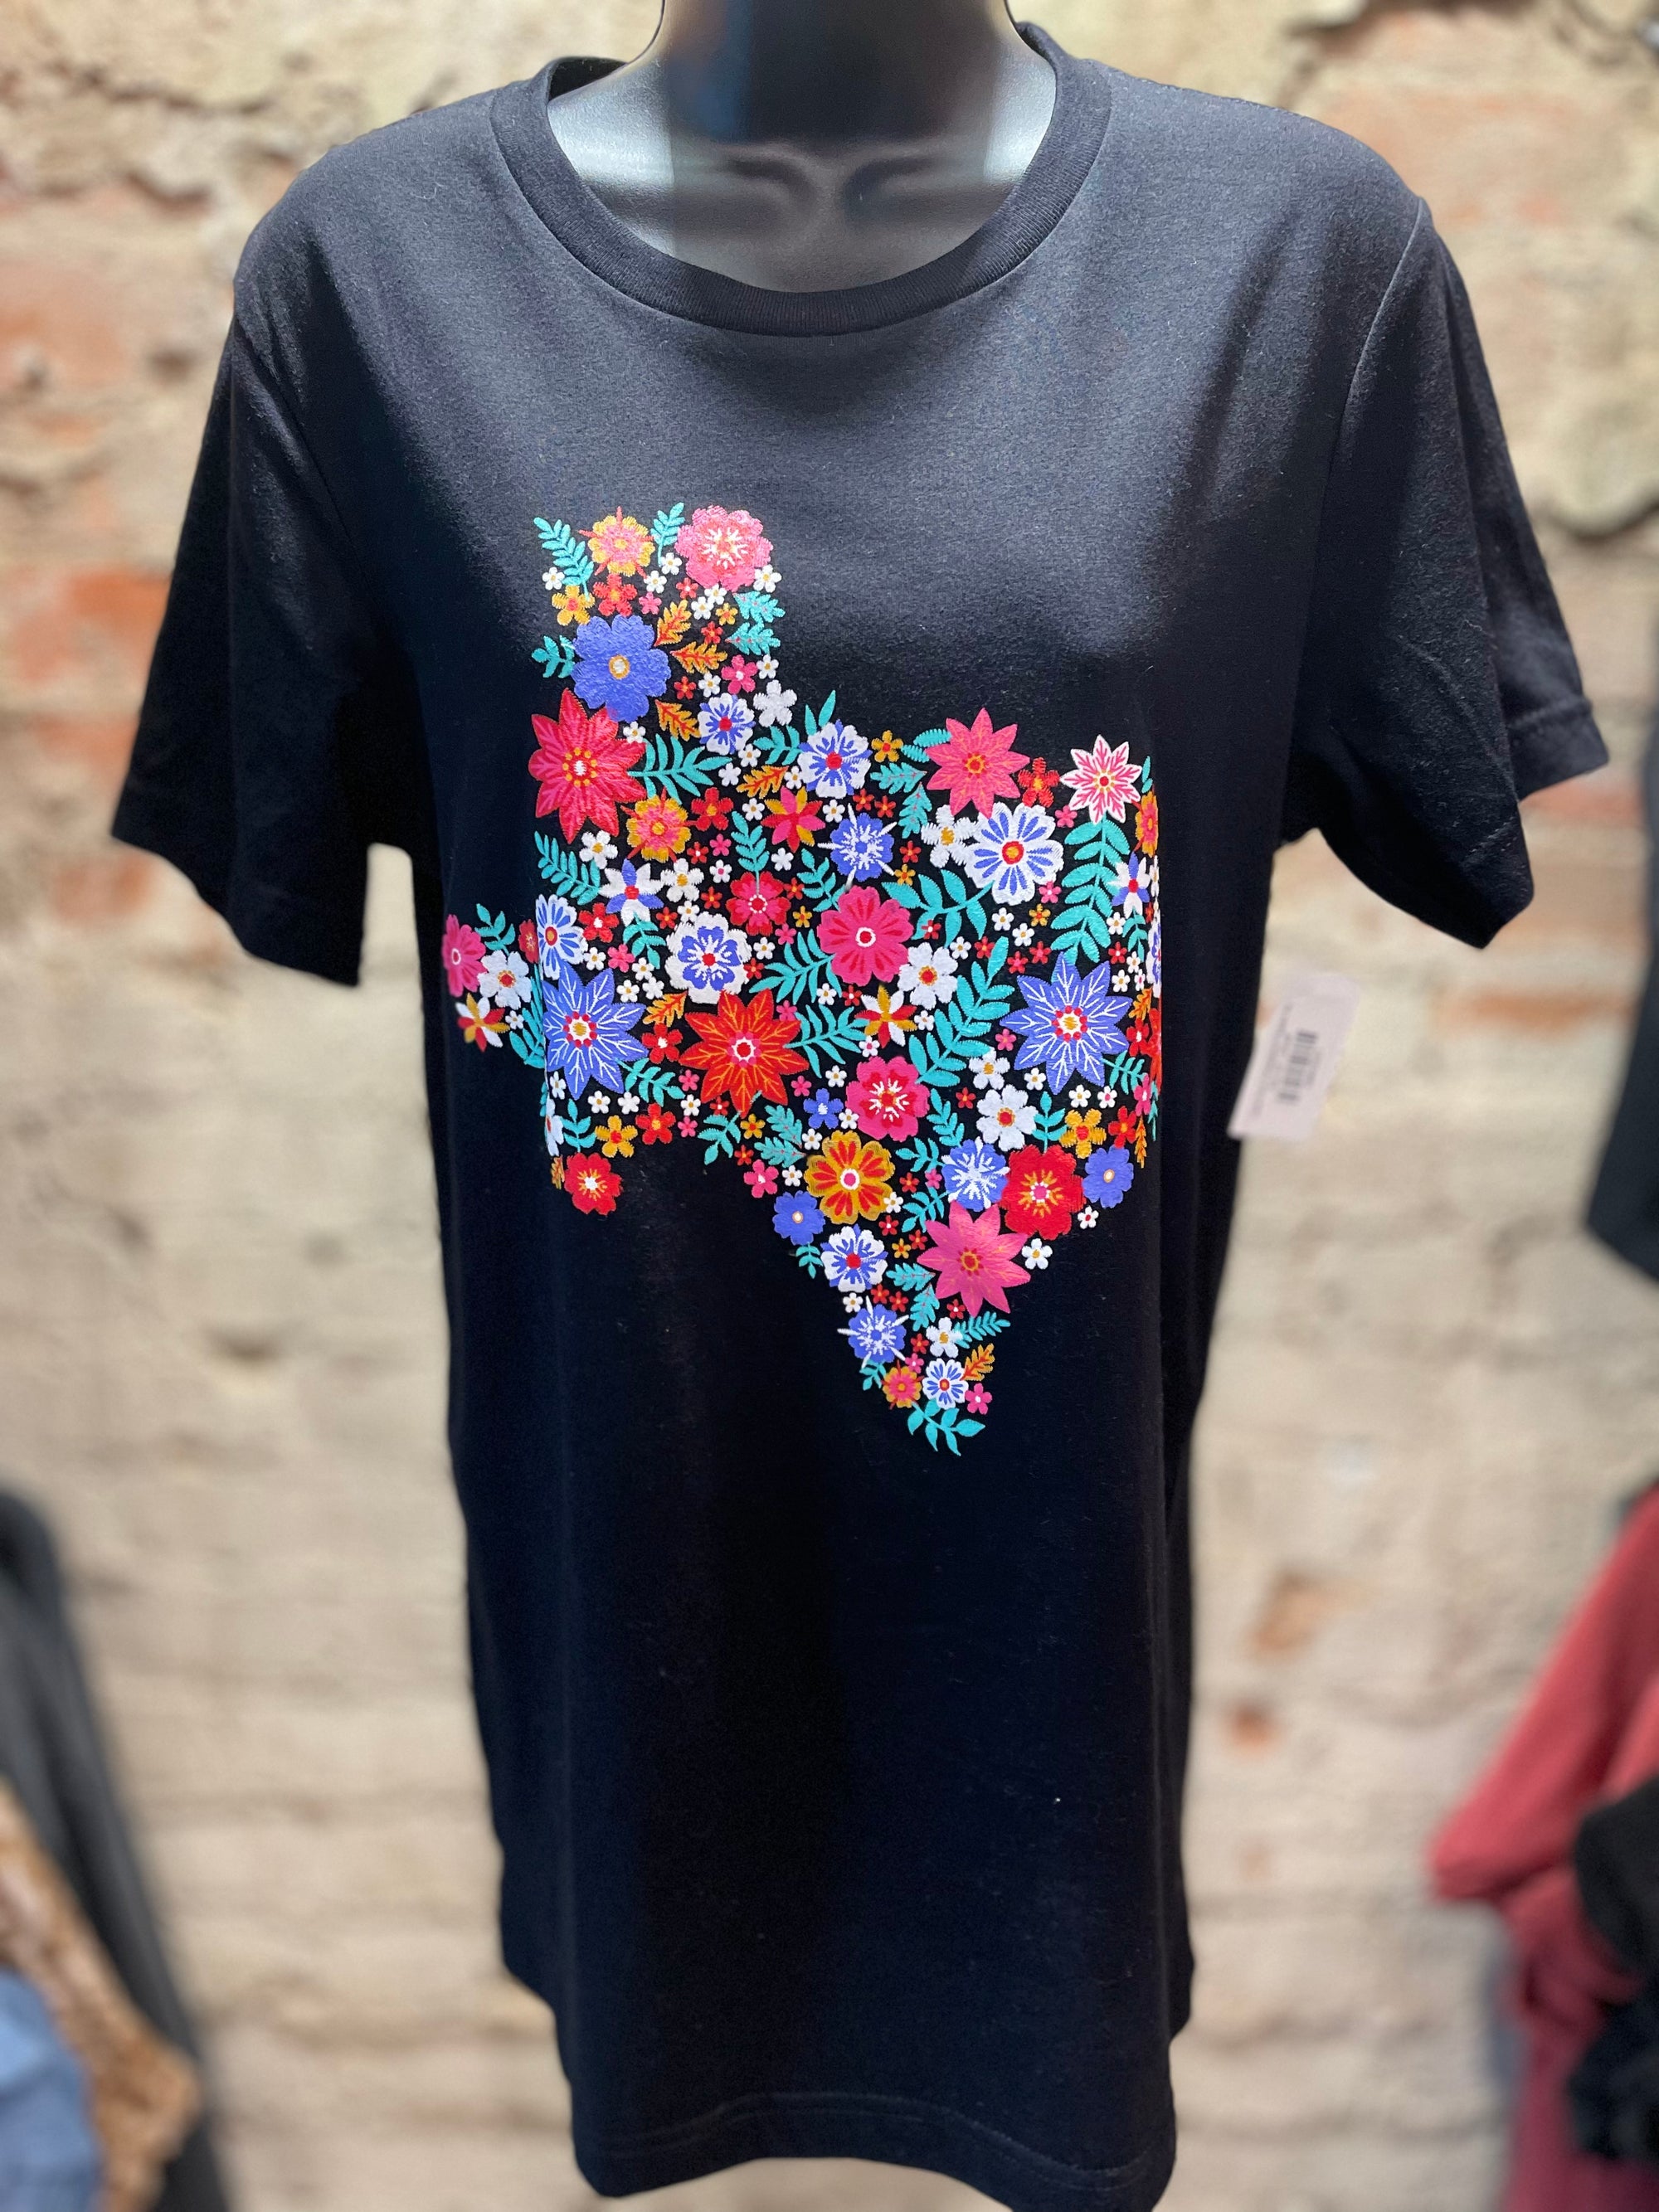 Graphic Tee - Texas Embroidered Flowers